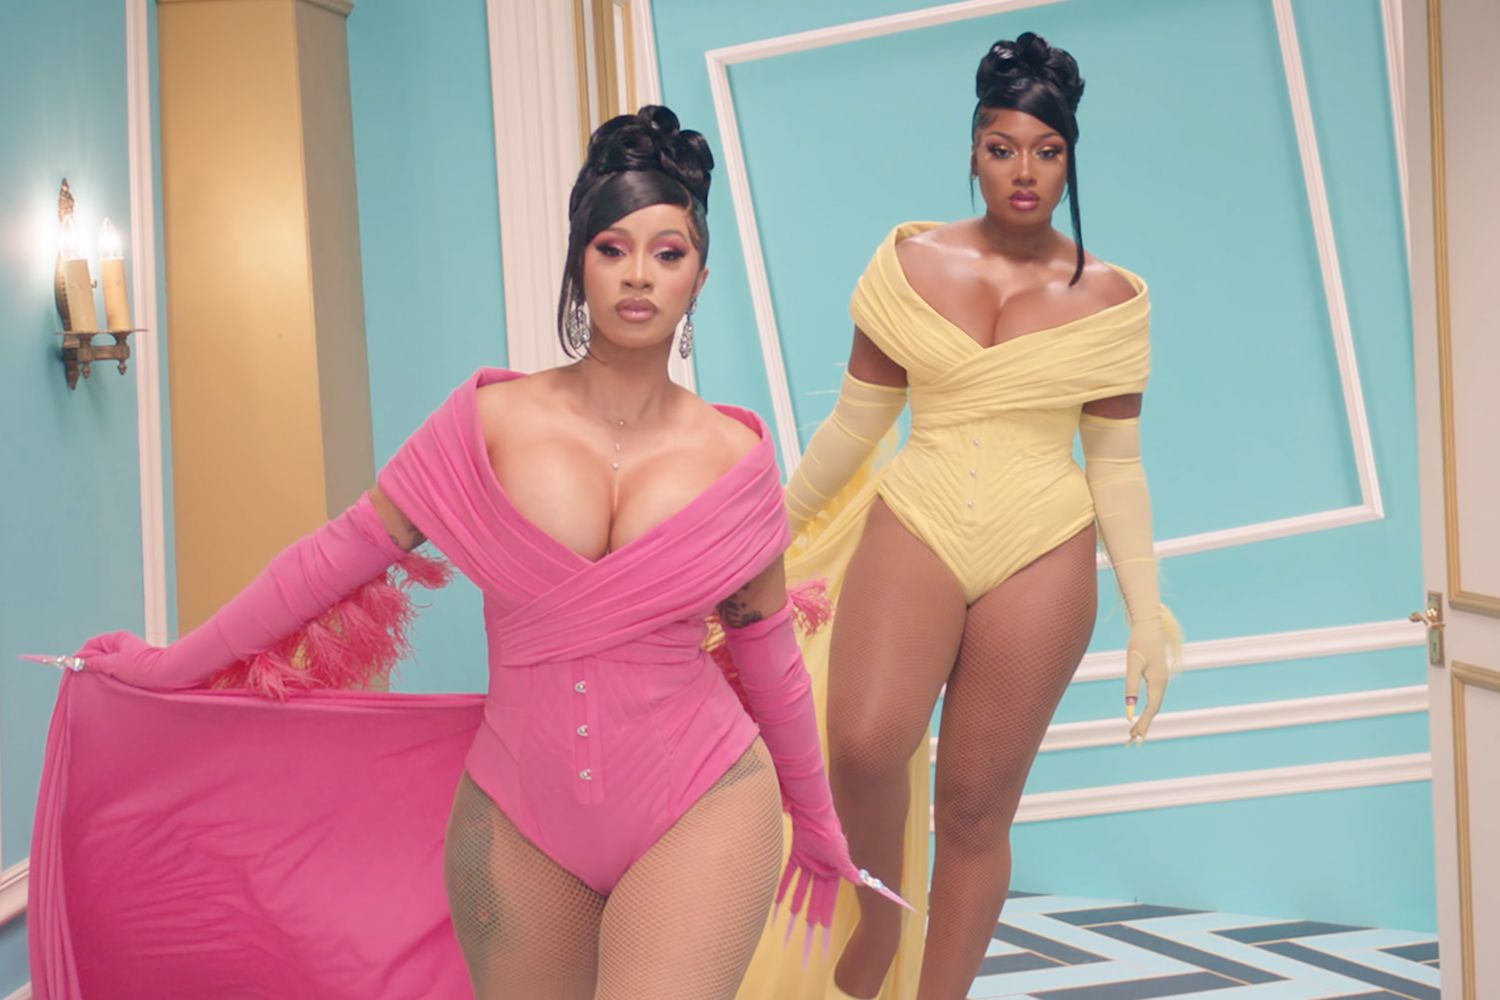 Cardi B and Megan Thee Stallion Tease New Collab 1 Year After 'WAP'